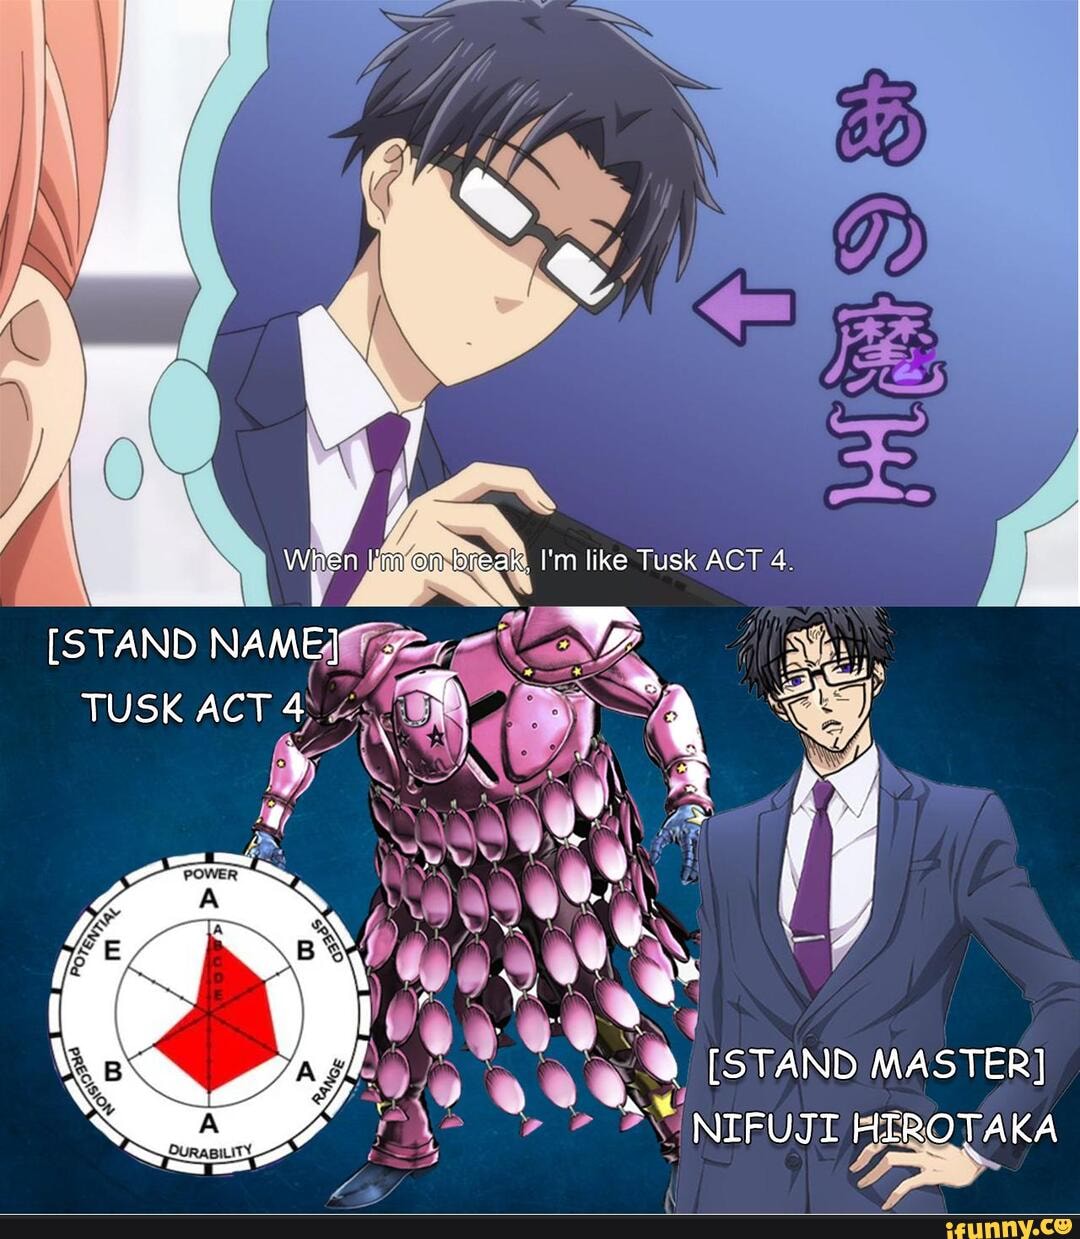 STAND TUSK ACT 4) [STAND MASTER] BILITY - iFunny